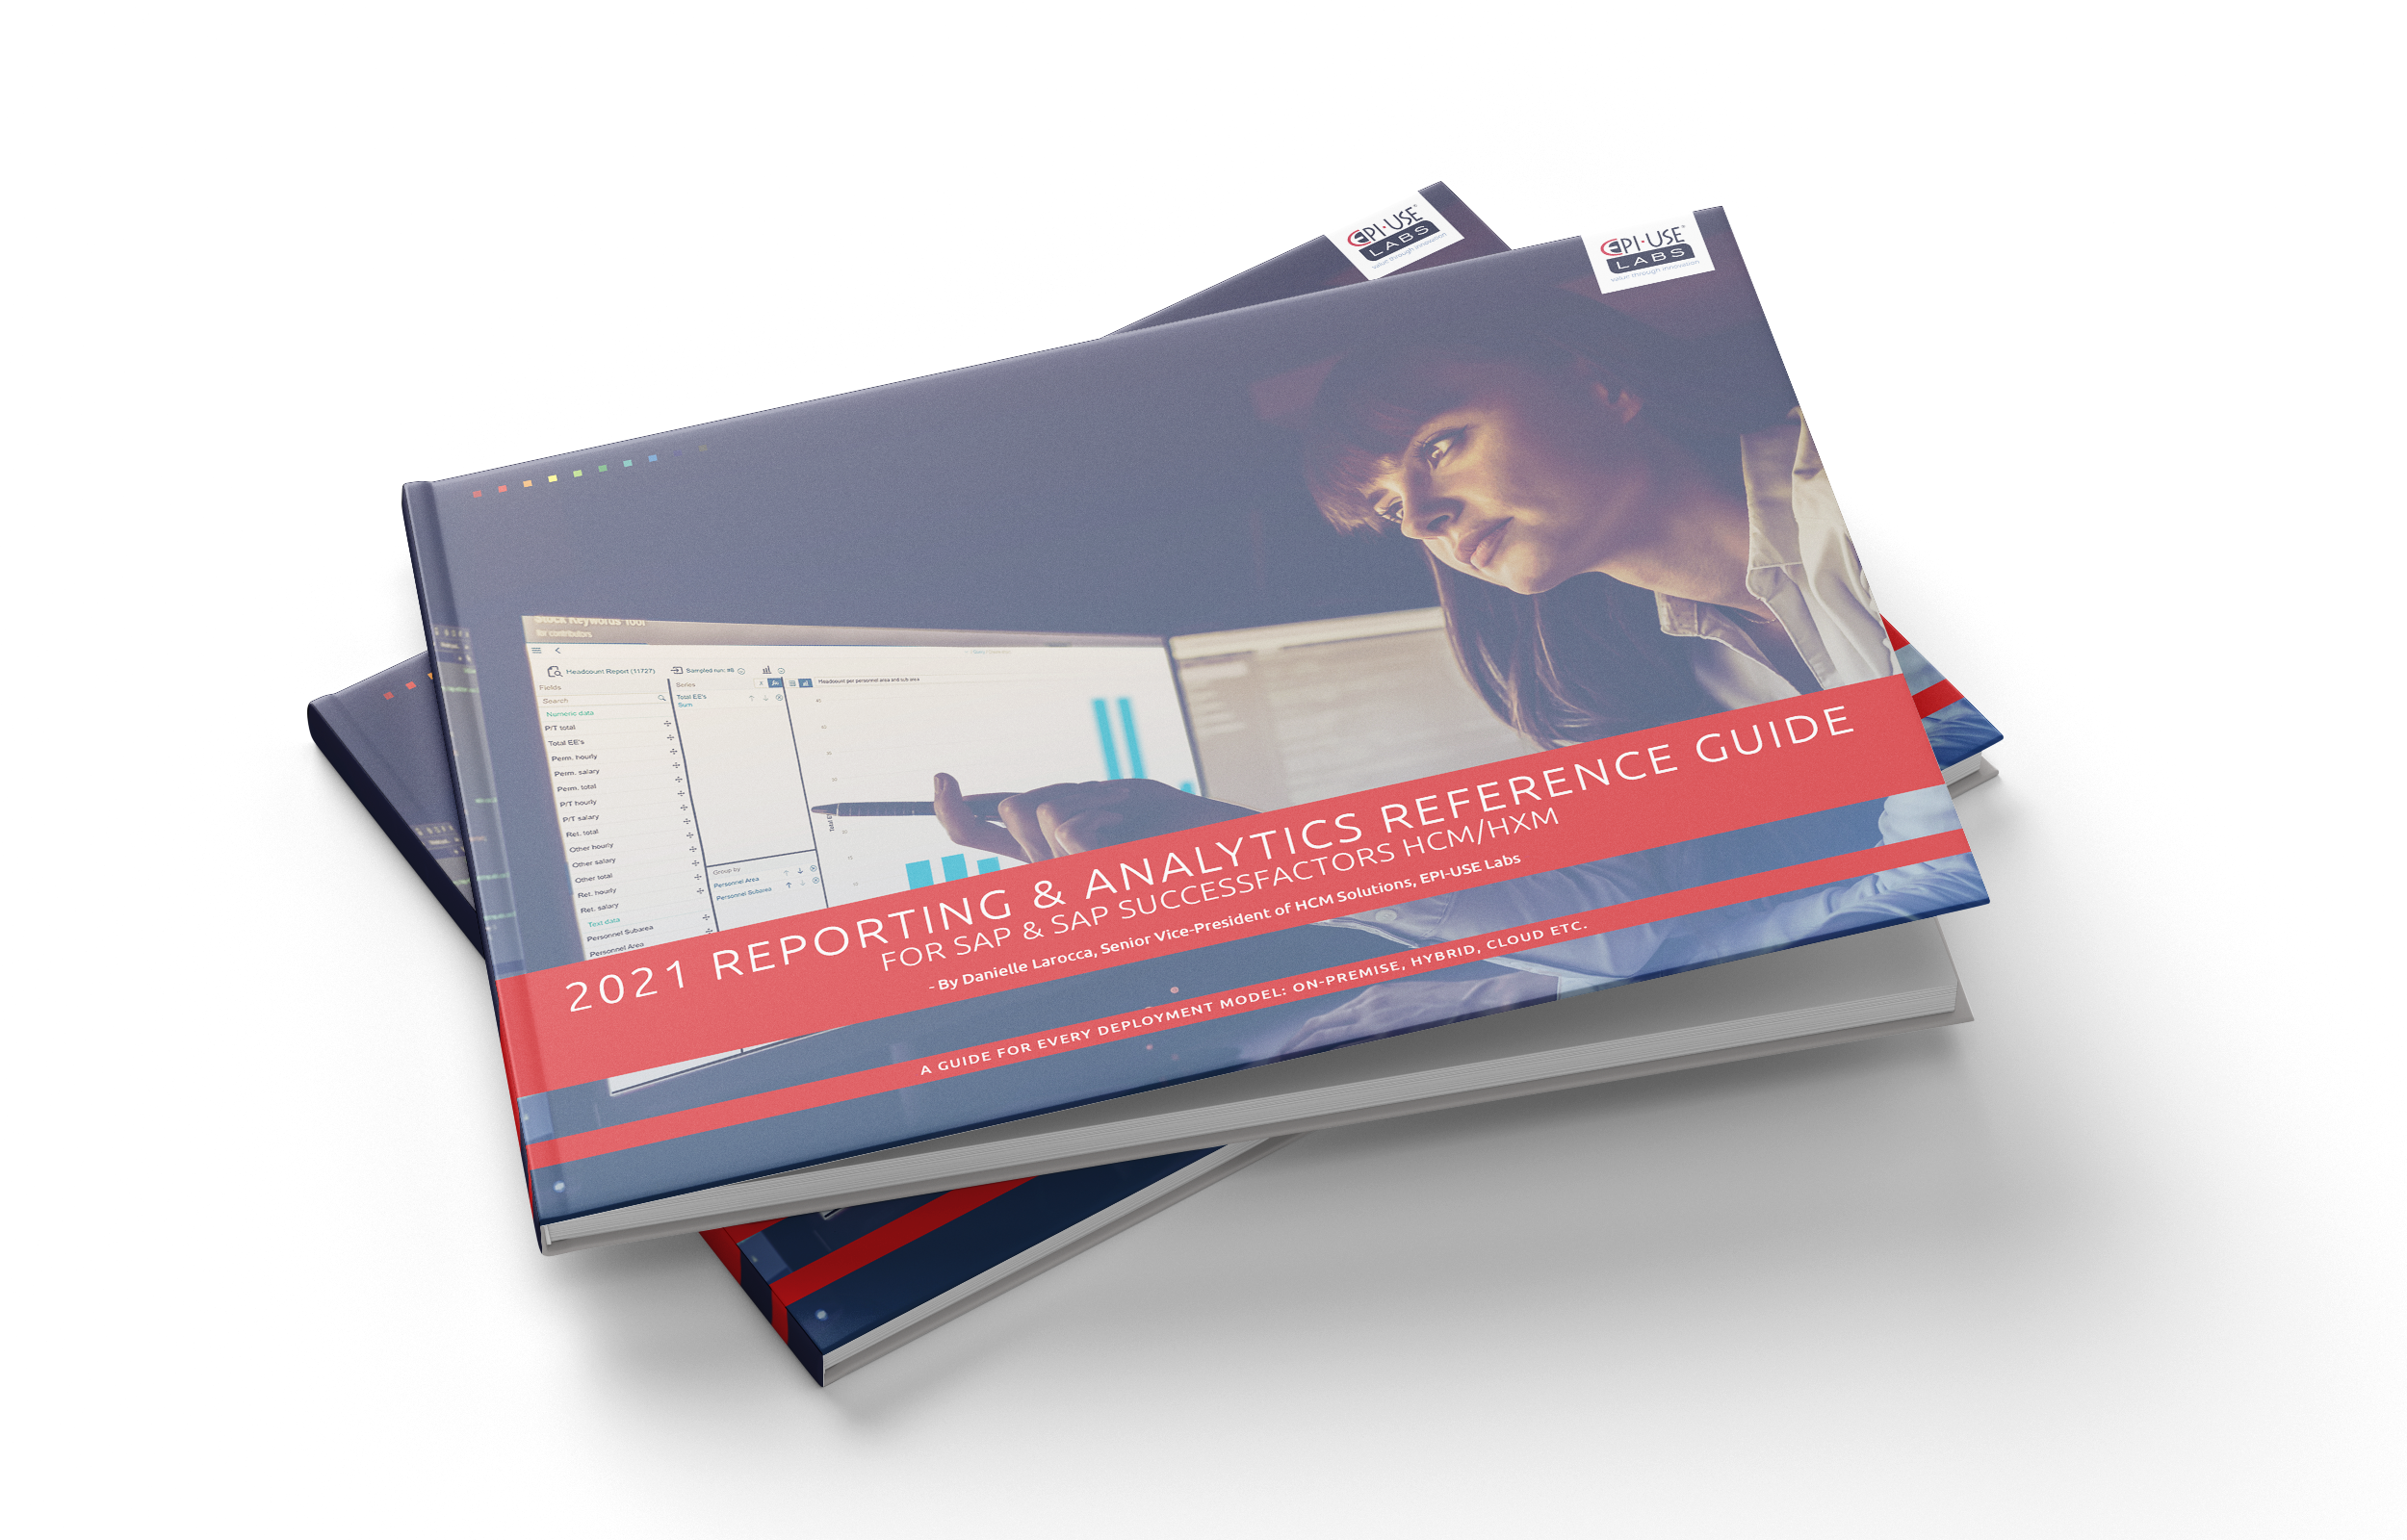 2021_Reporting___Analytics_Reference_Guide_V2